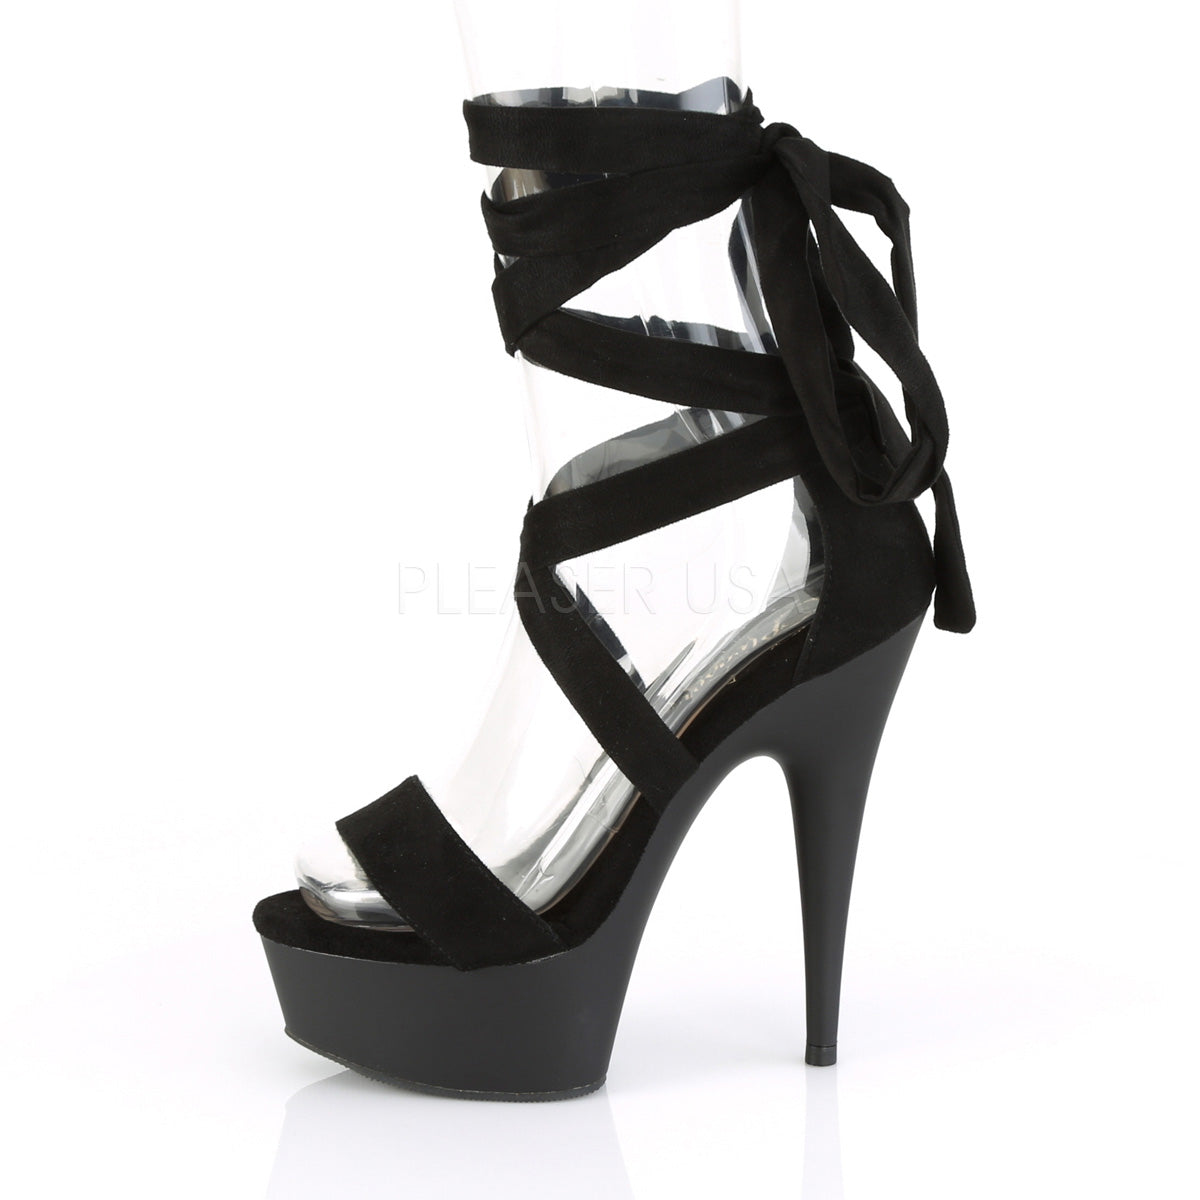 PLEASER Delight-671 Black Faux Suede Criss Cross Strappy Tie Up Sandals 6" Heels - A Shoe Addiction